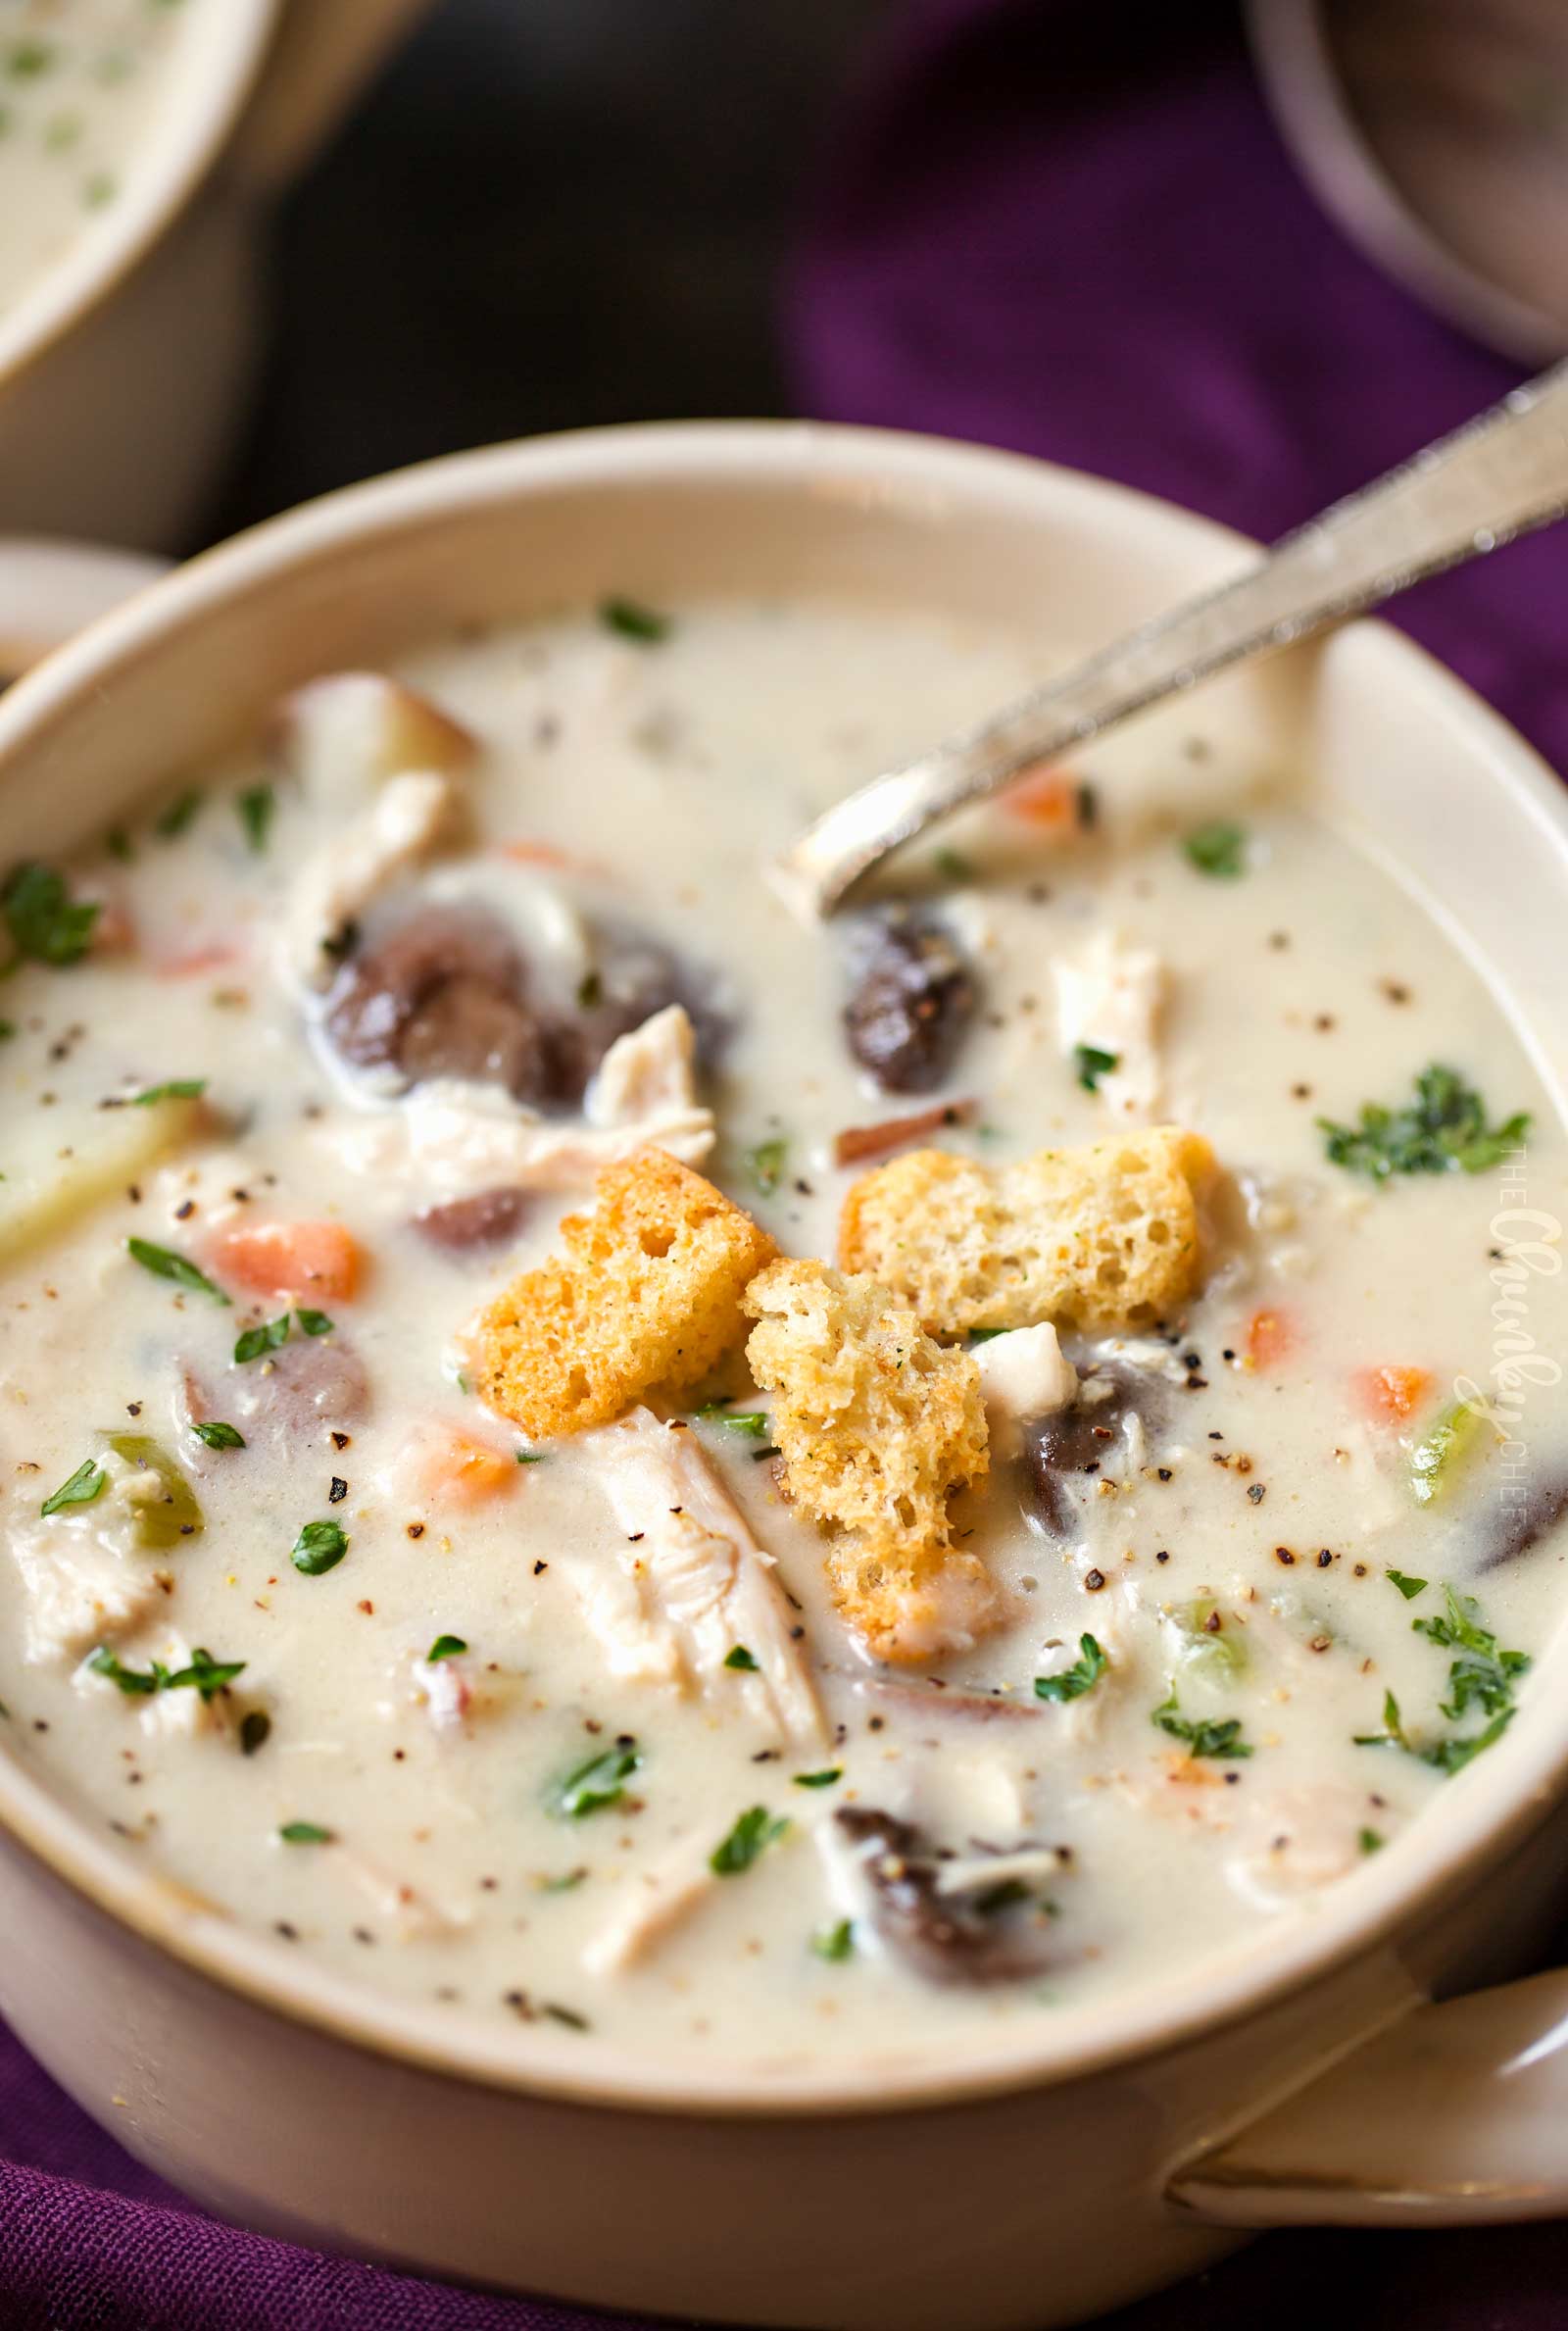 Chowder in serving bowl topped with crunchy croutons